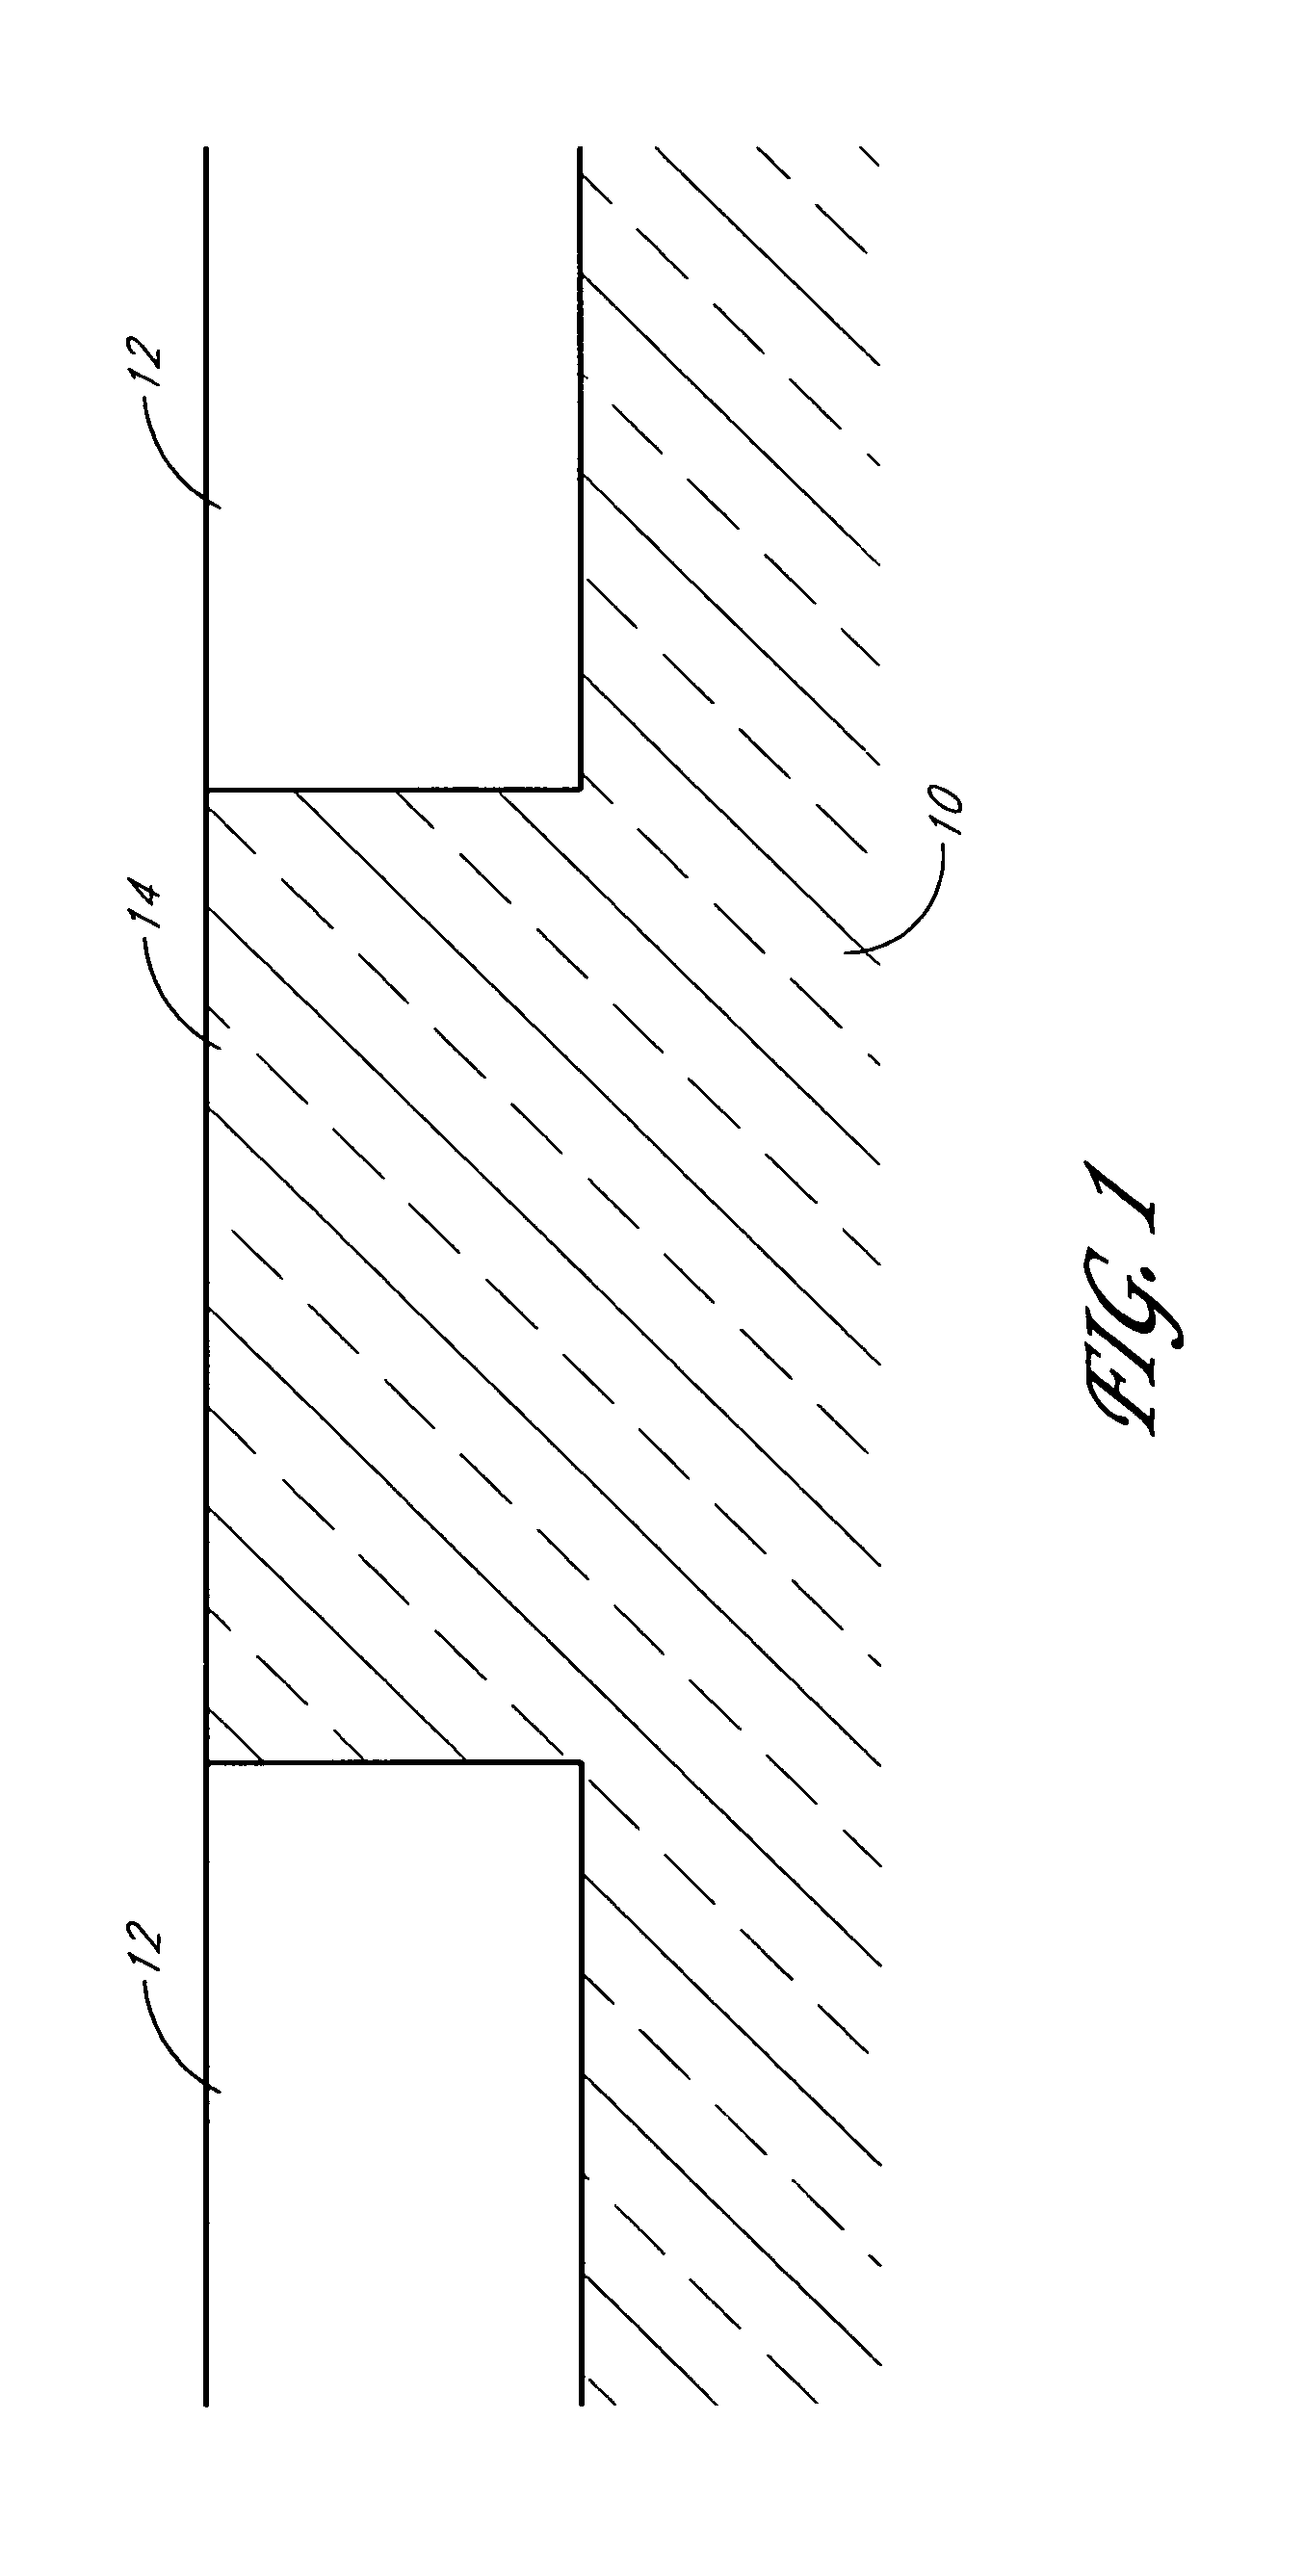 Epitaxial deposition of doped semiconductor materials